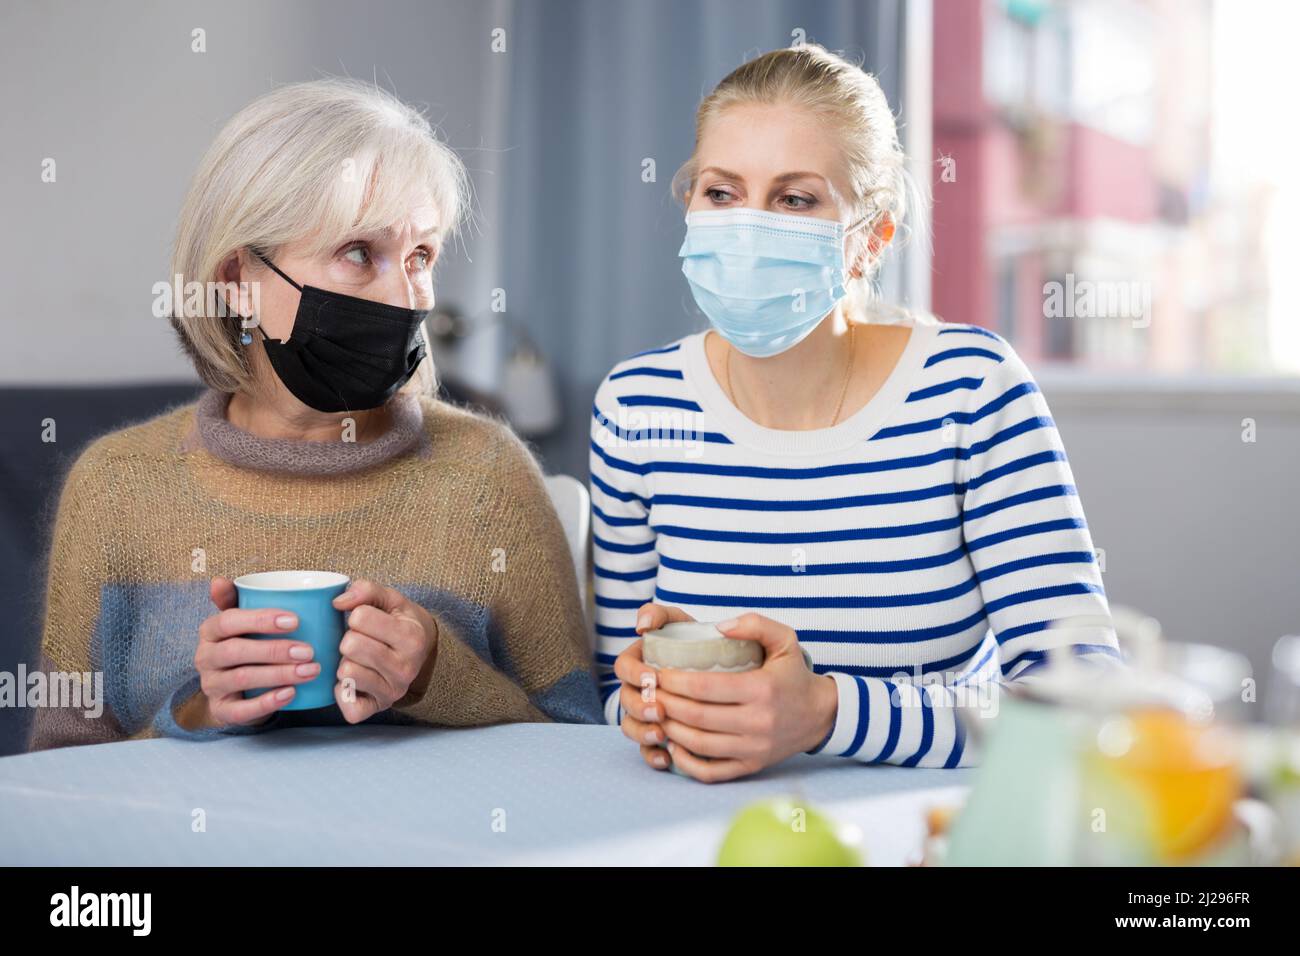 Two women in protective mask drink tea Stock Photo